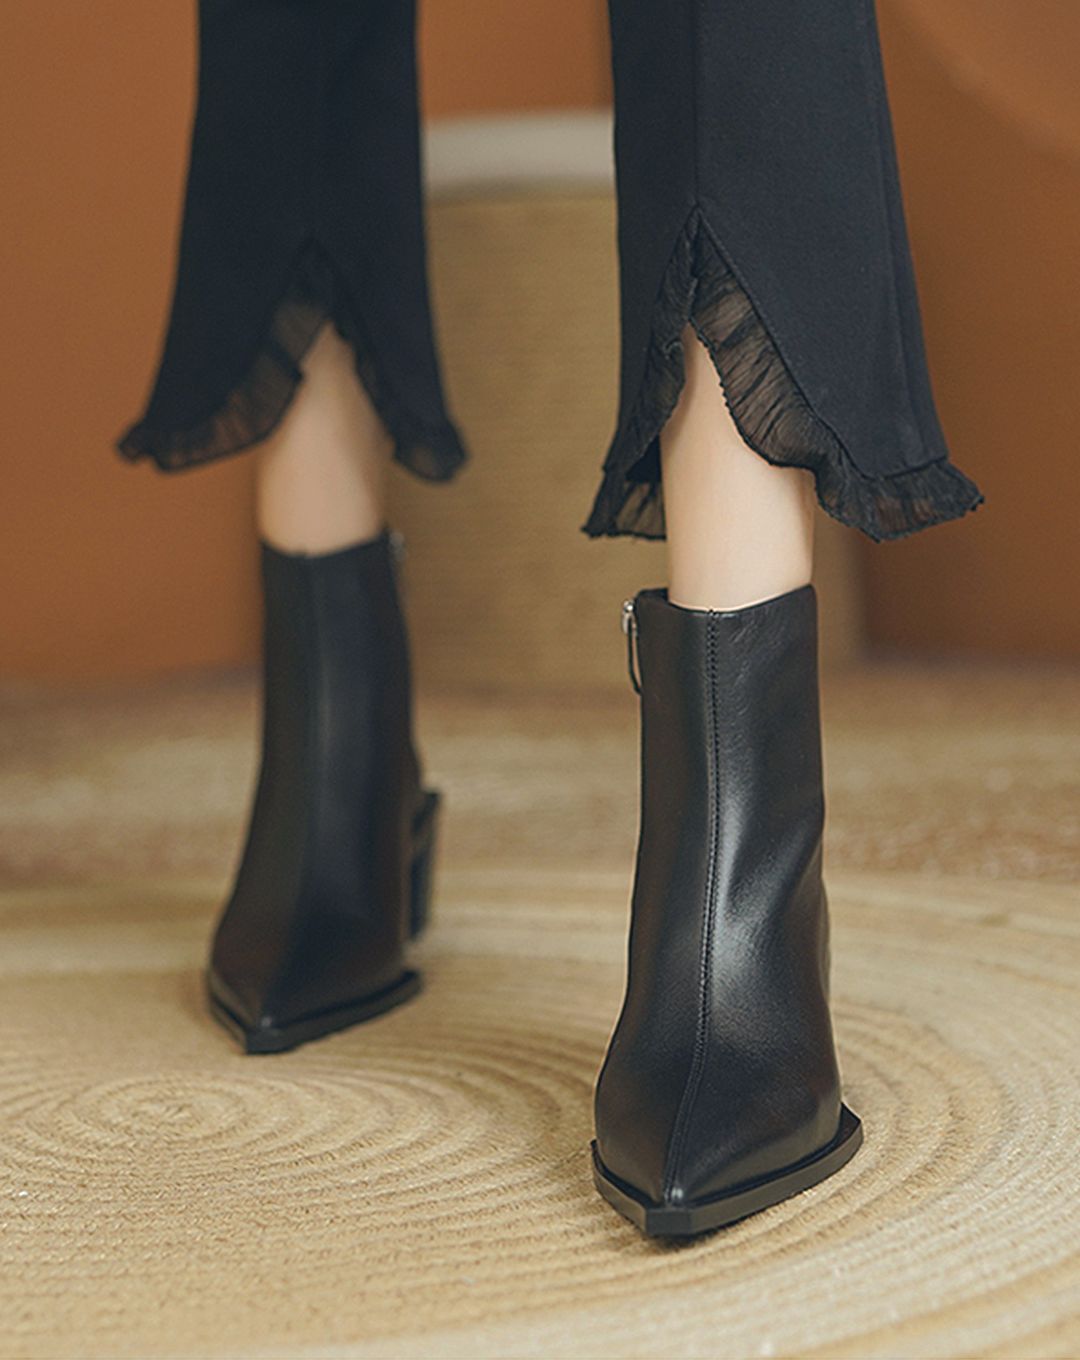 ♀Square Heel and Pointed Toe Boots